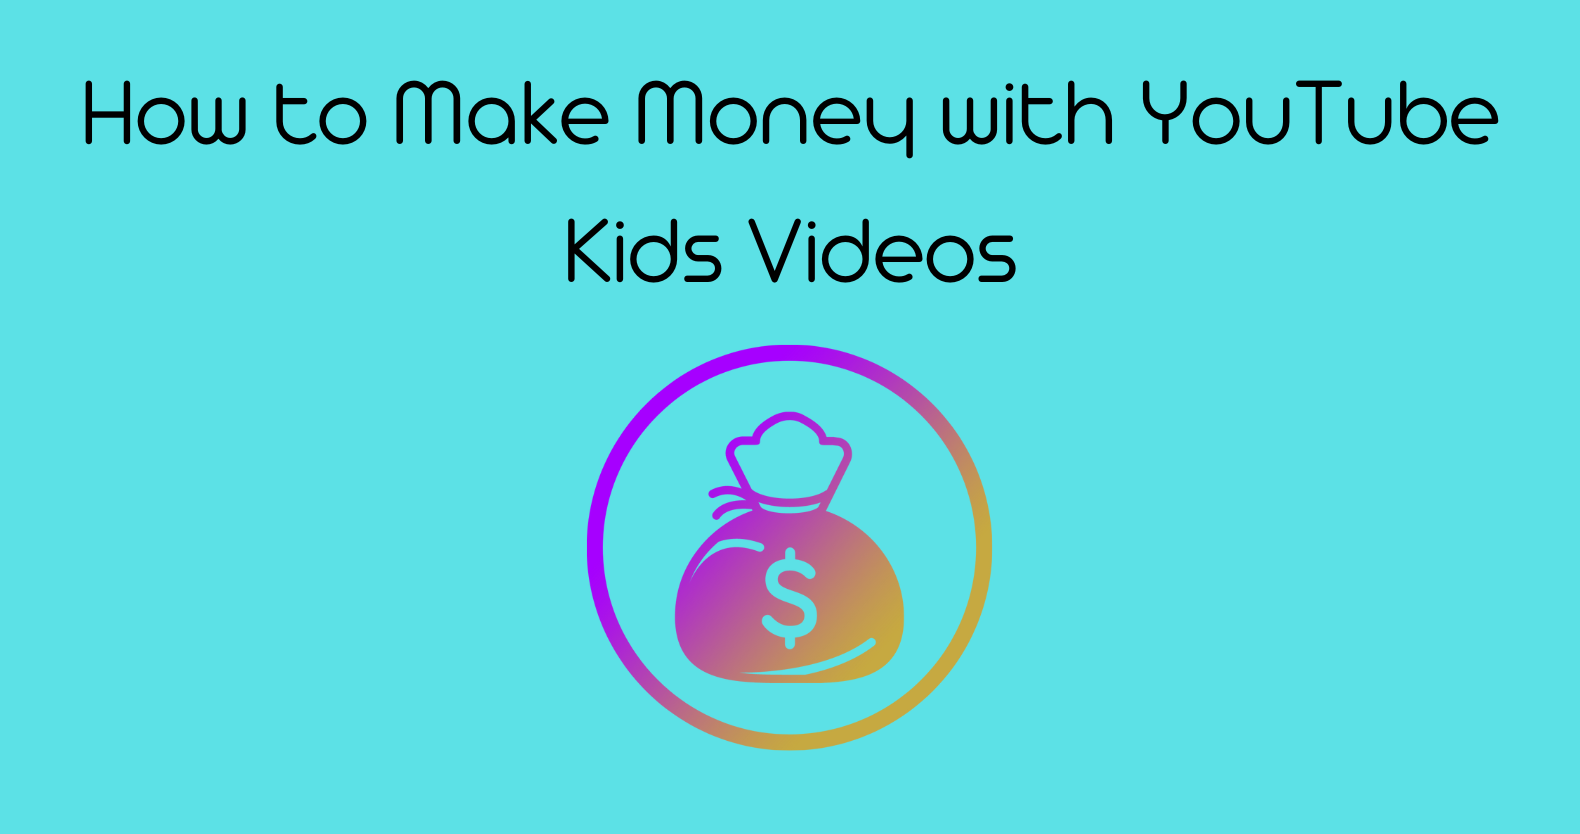 How to Make Money with YouTube Kids Videos